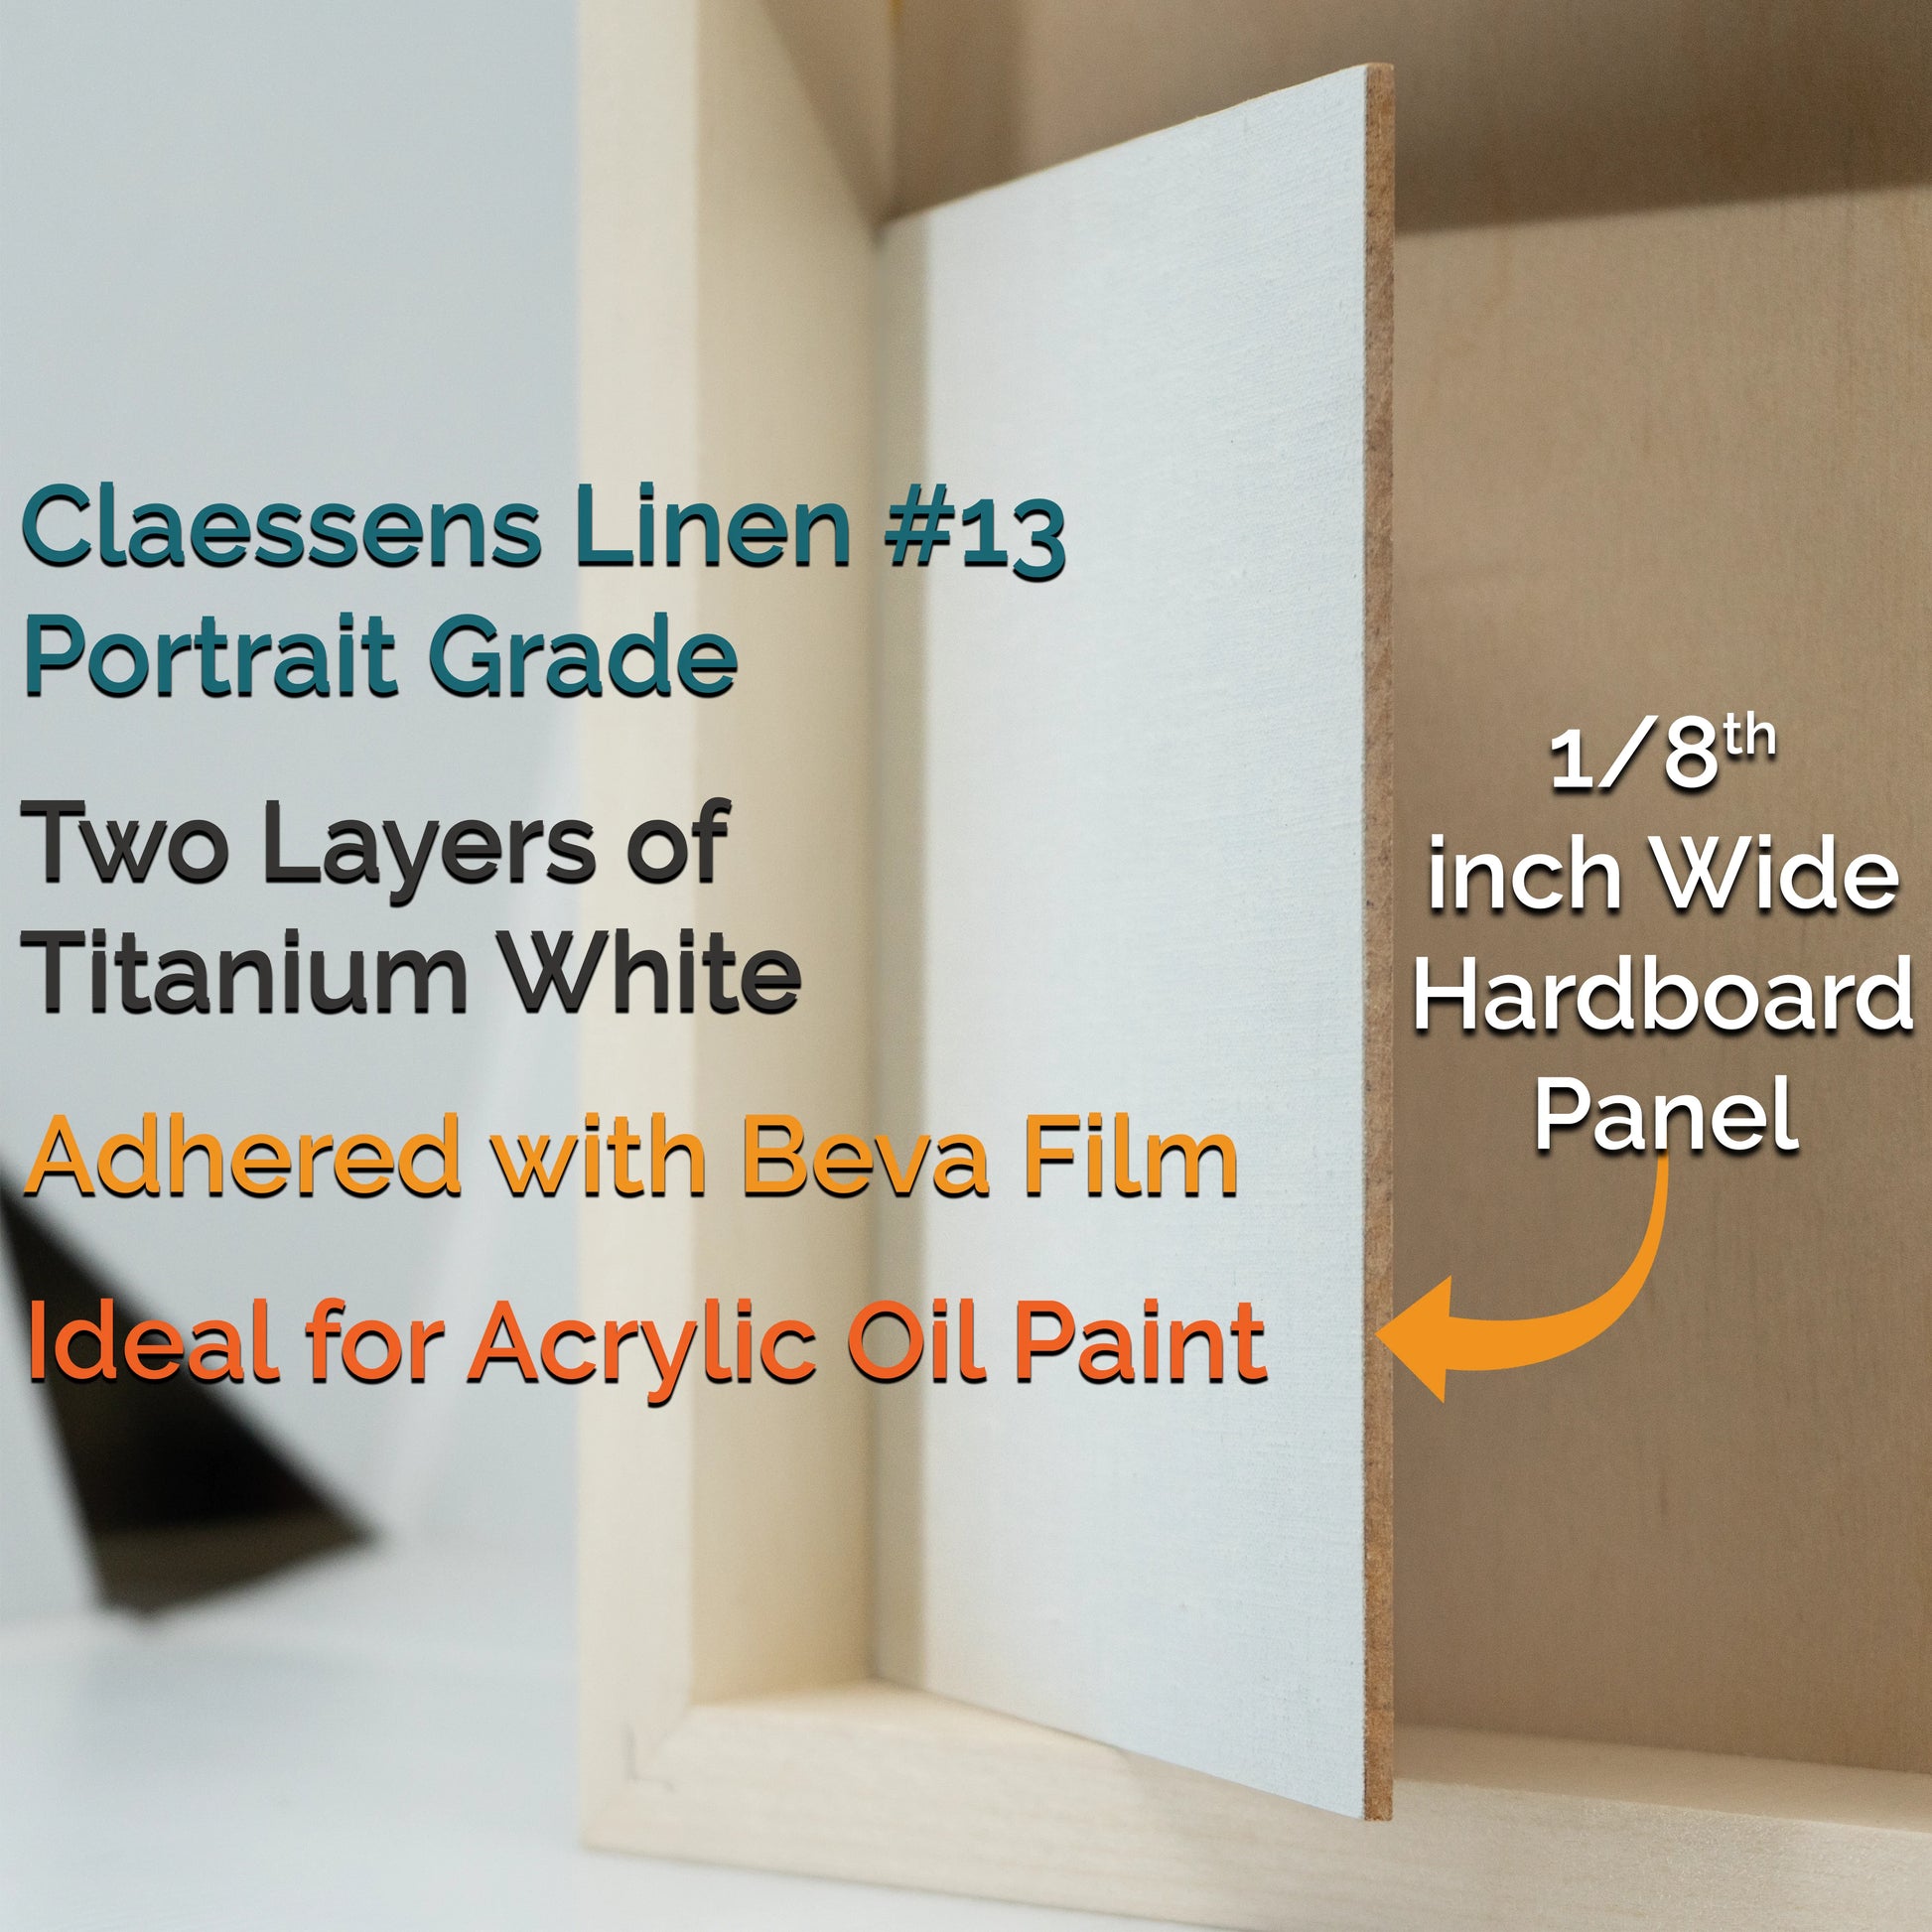 Acrylic Primed Linen Painting Panel - Hardboard Universal Primed Canvas for Oil and Acrylic Paint - Trekell Art Supplies